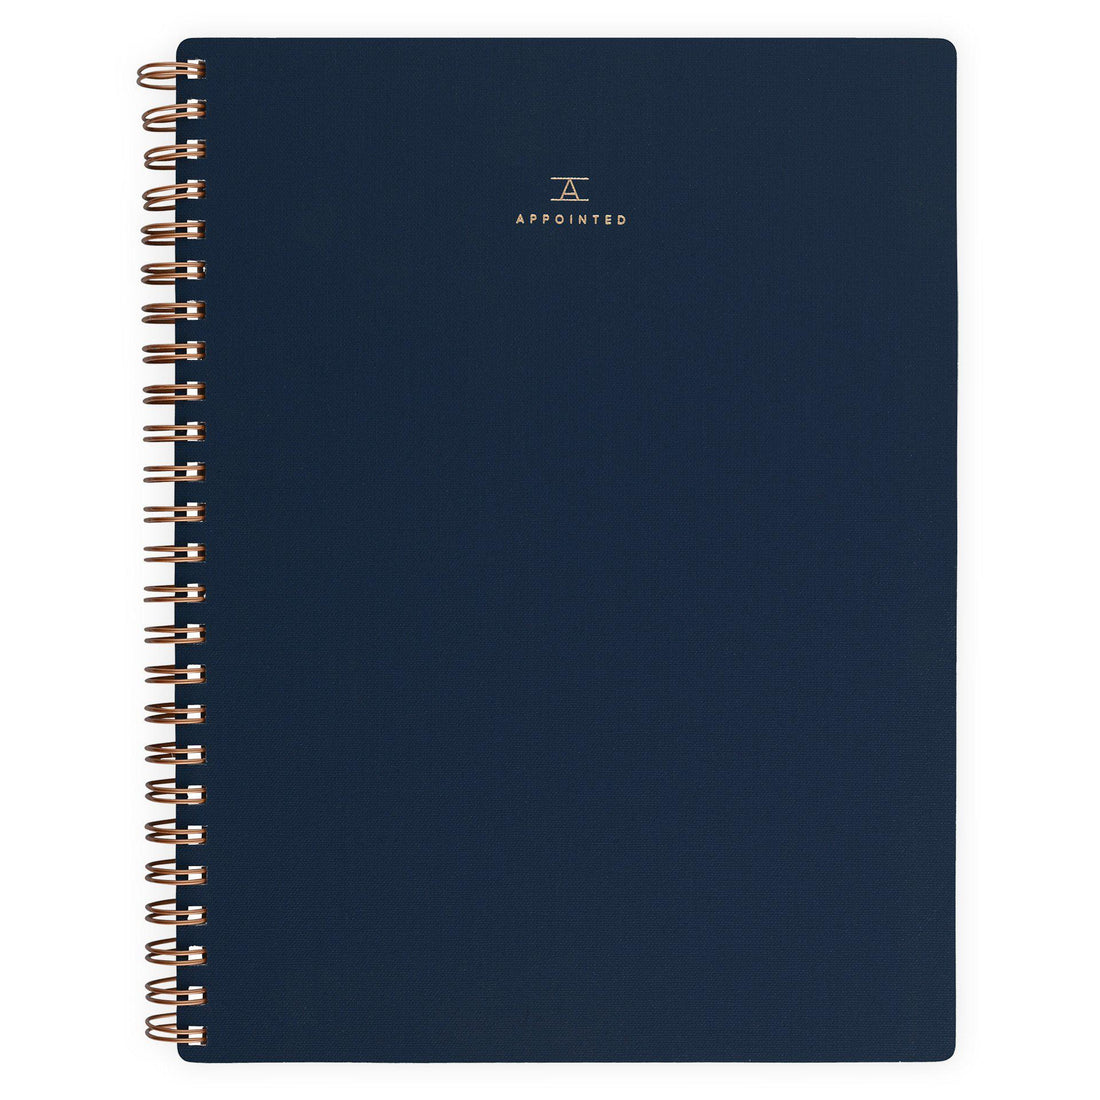 Appointed Oxford Blue Workbook | Lined or Grid 